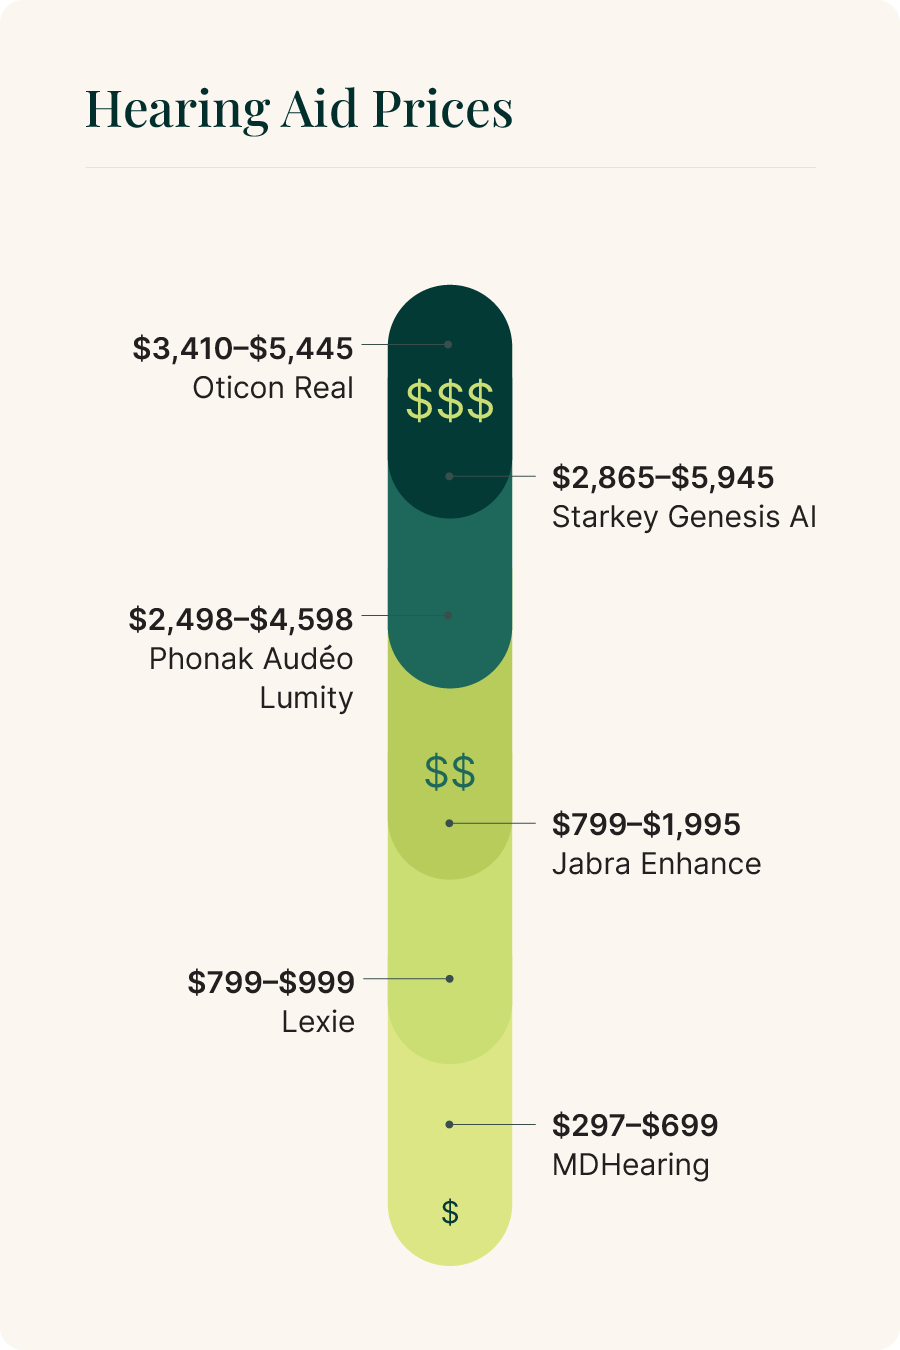 Hearing aid prices graphic